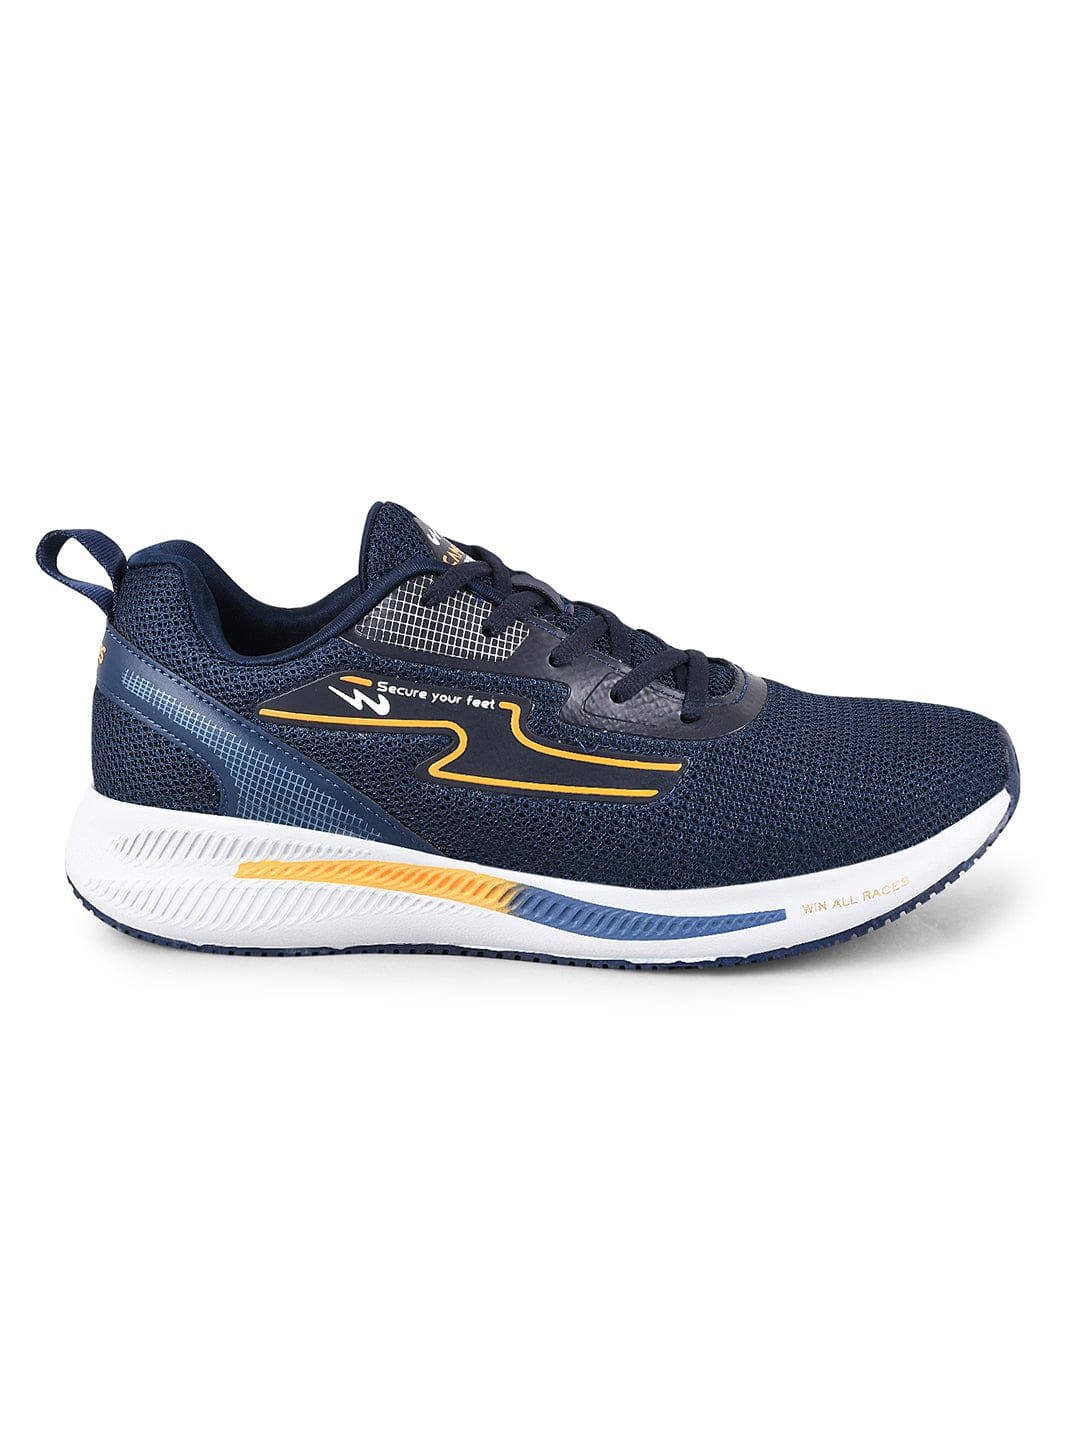 Buy CAMP-RAMBO Navy Men's Running Shoes online | Campus Shoes